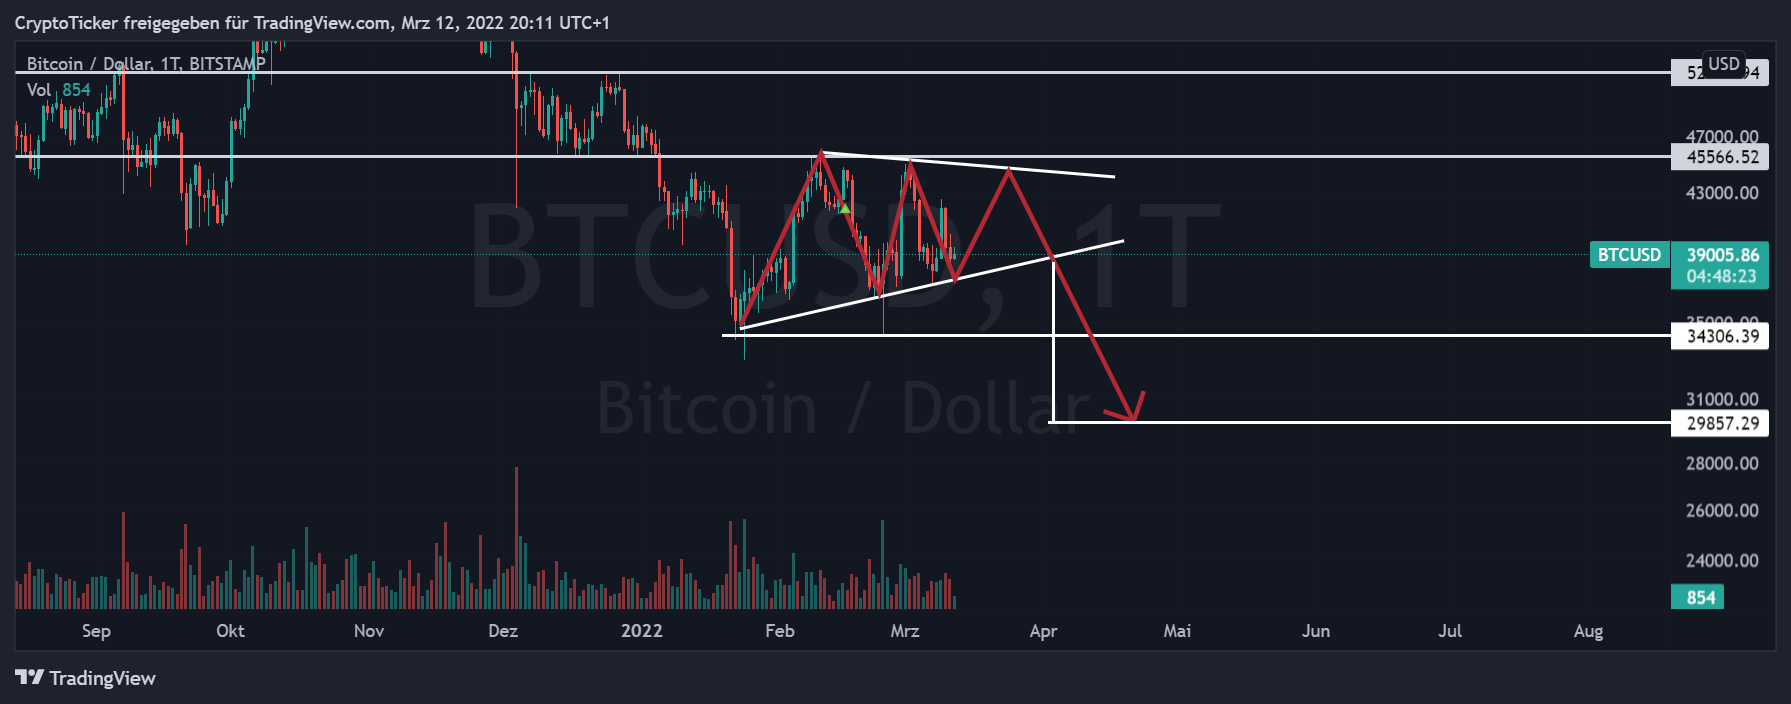 BTC/USD 1-day chart showing the potential drop of BTC